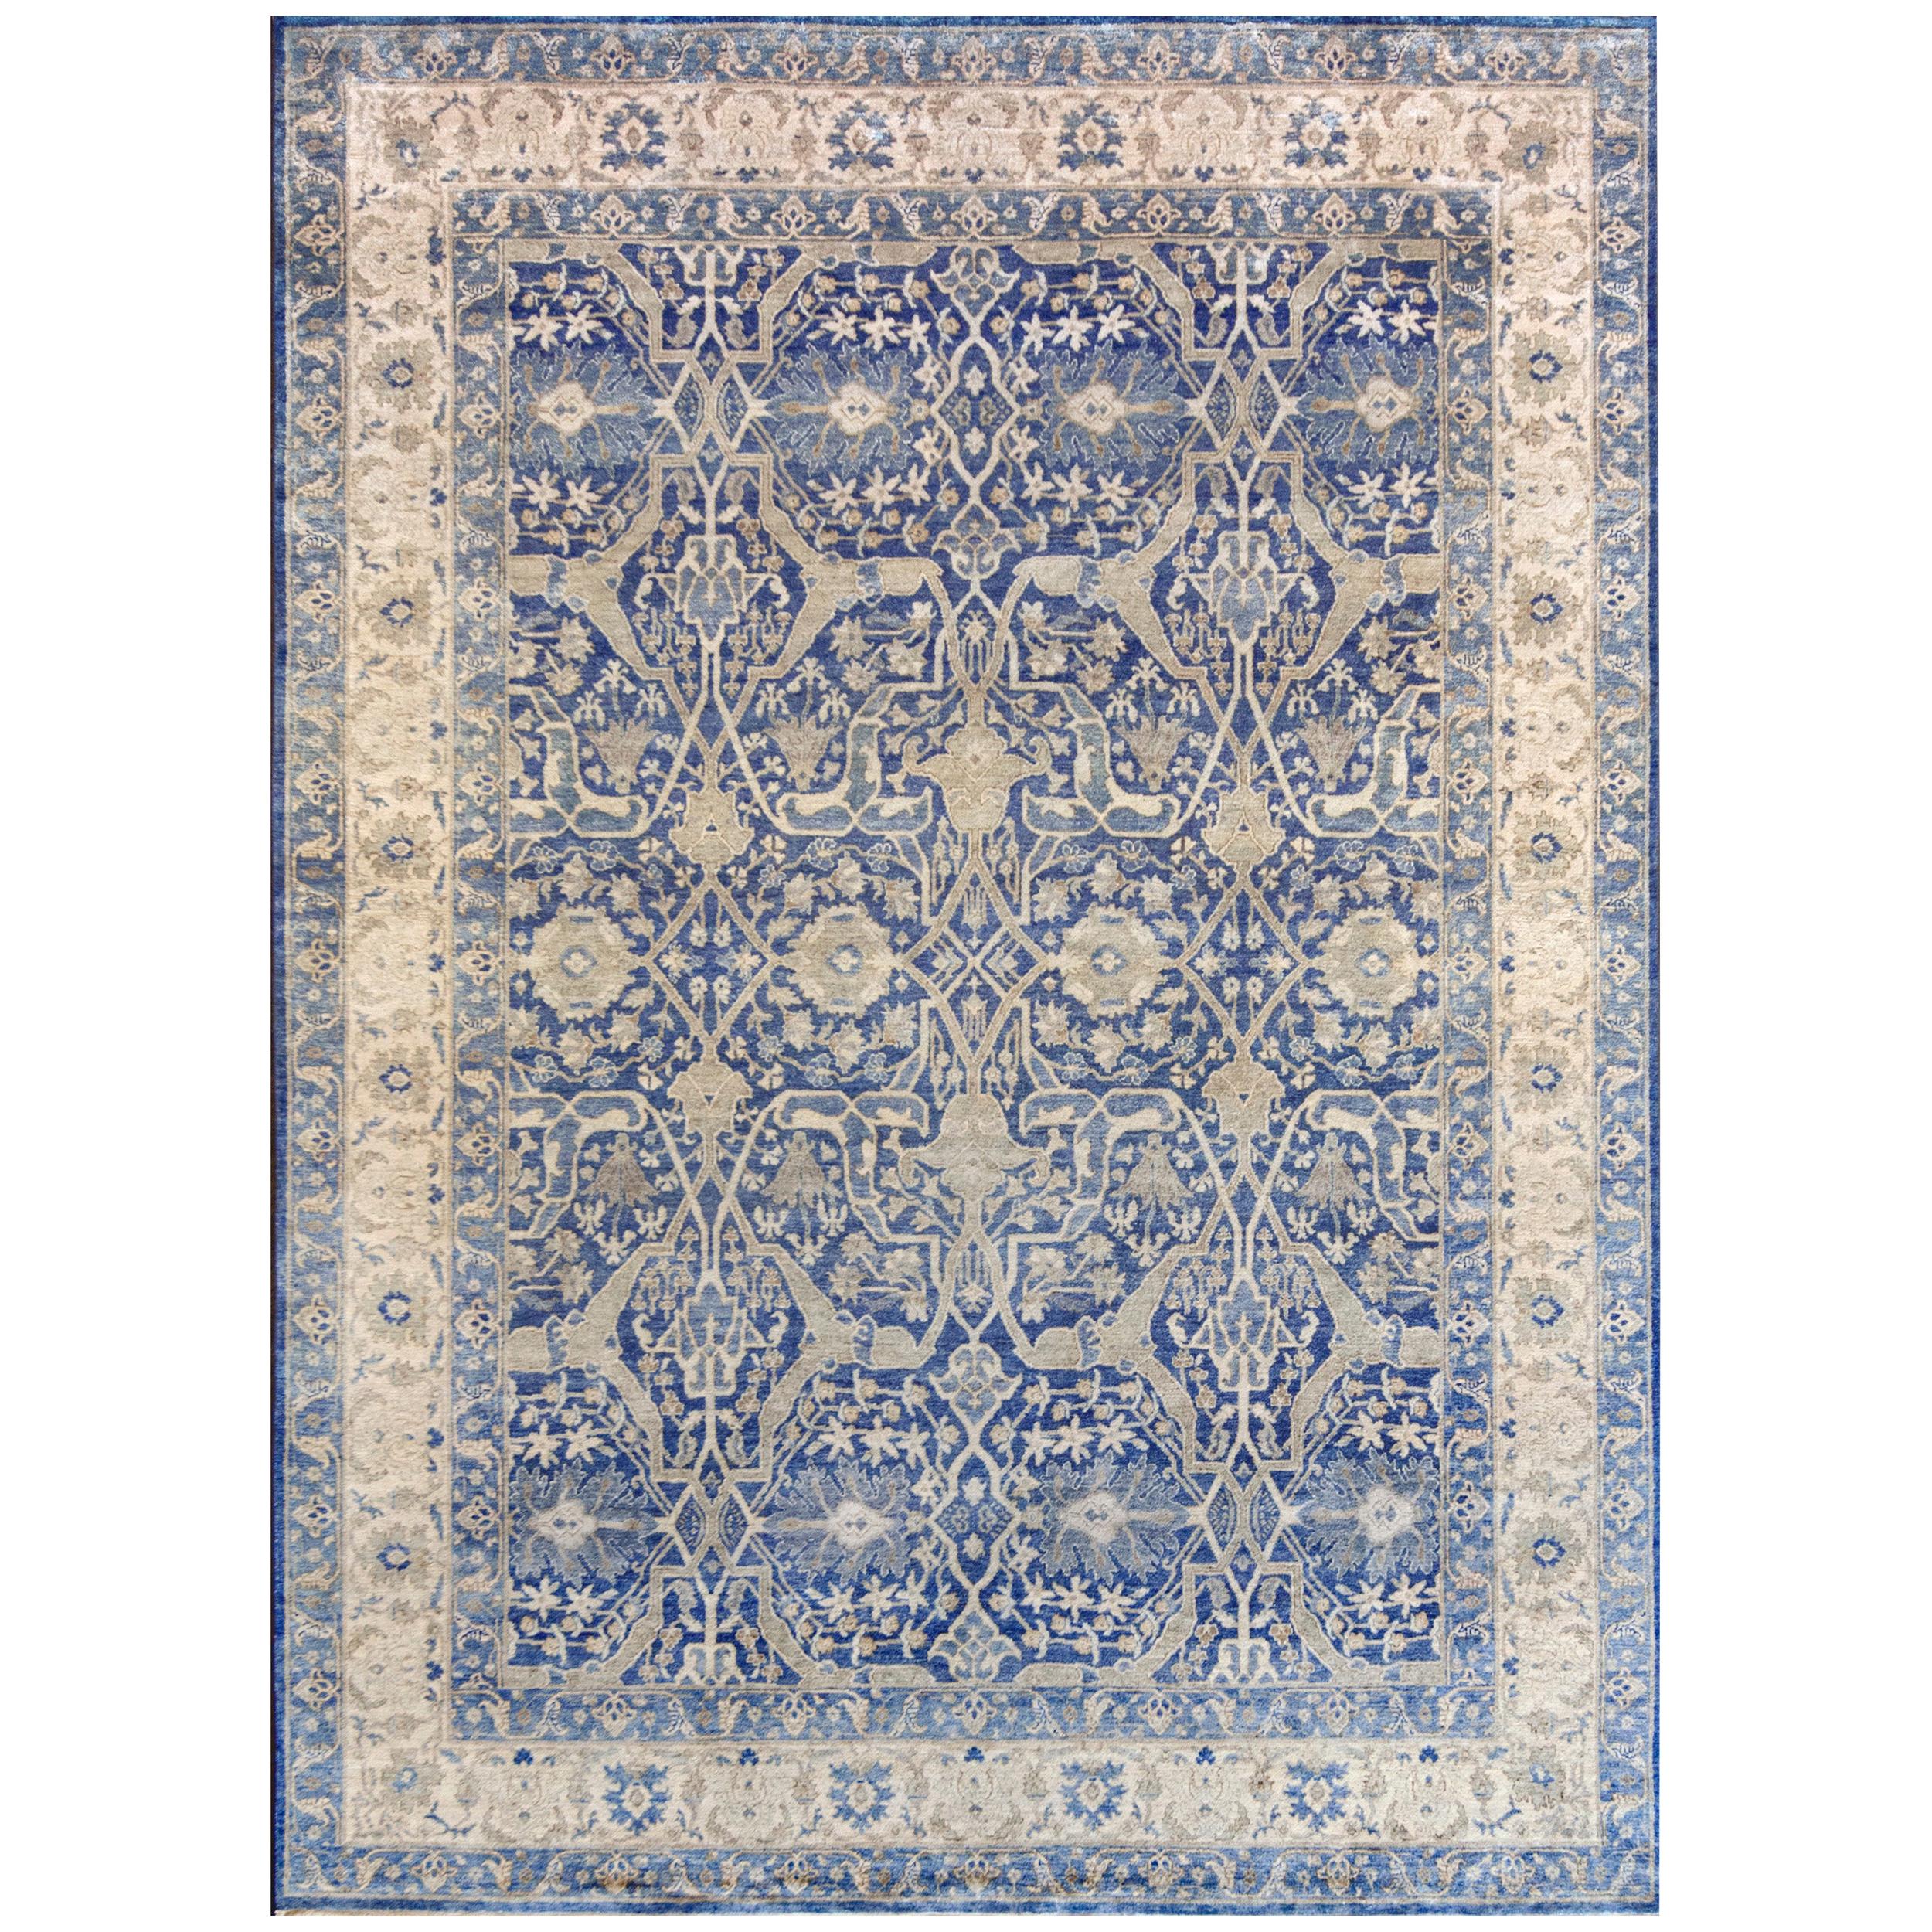 This handwoven silk Persian Tabriz rug has a shaded royal-blue field with and overall design of bold sandy-brown and ivory vine linking palmettes and delicate floral and leafy-vine, in an ivory border of light brown palmette and floral vine between